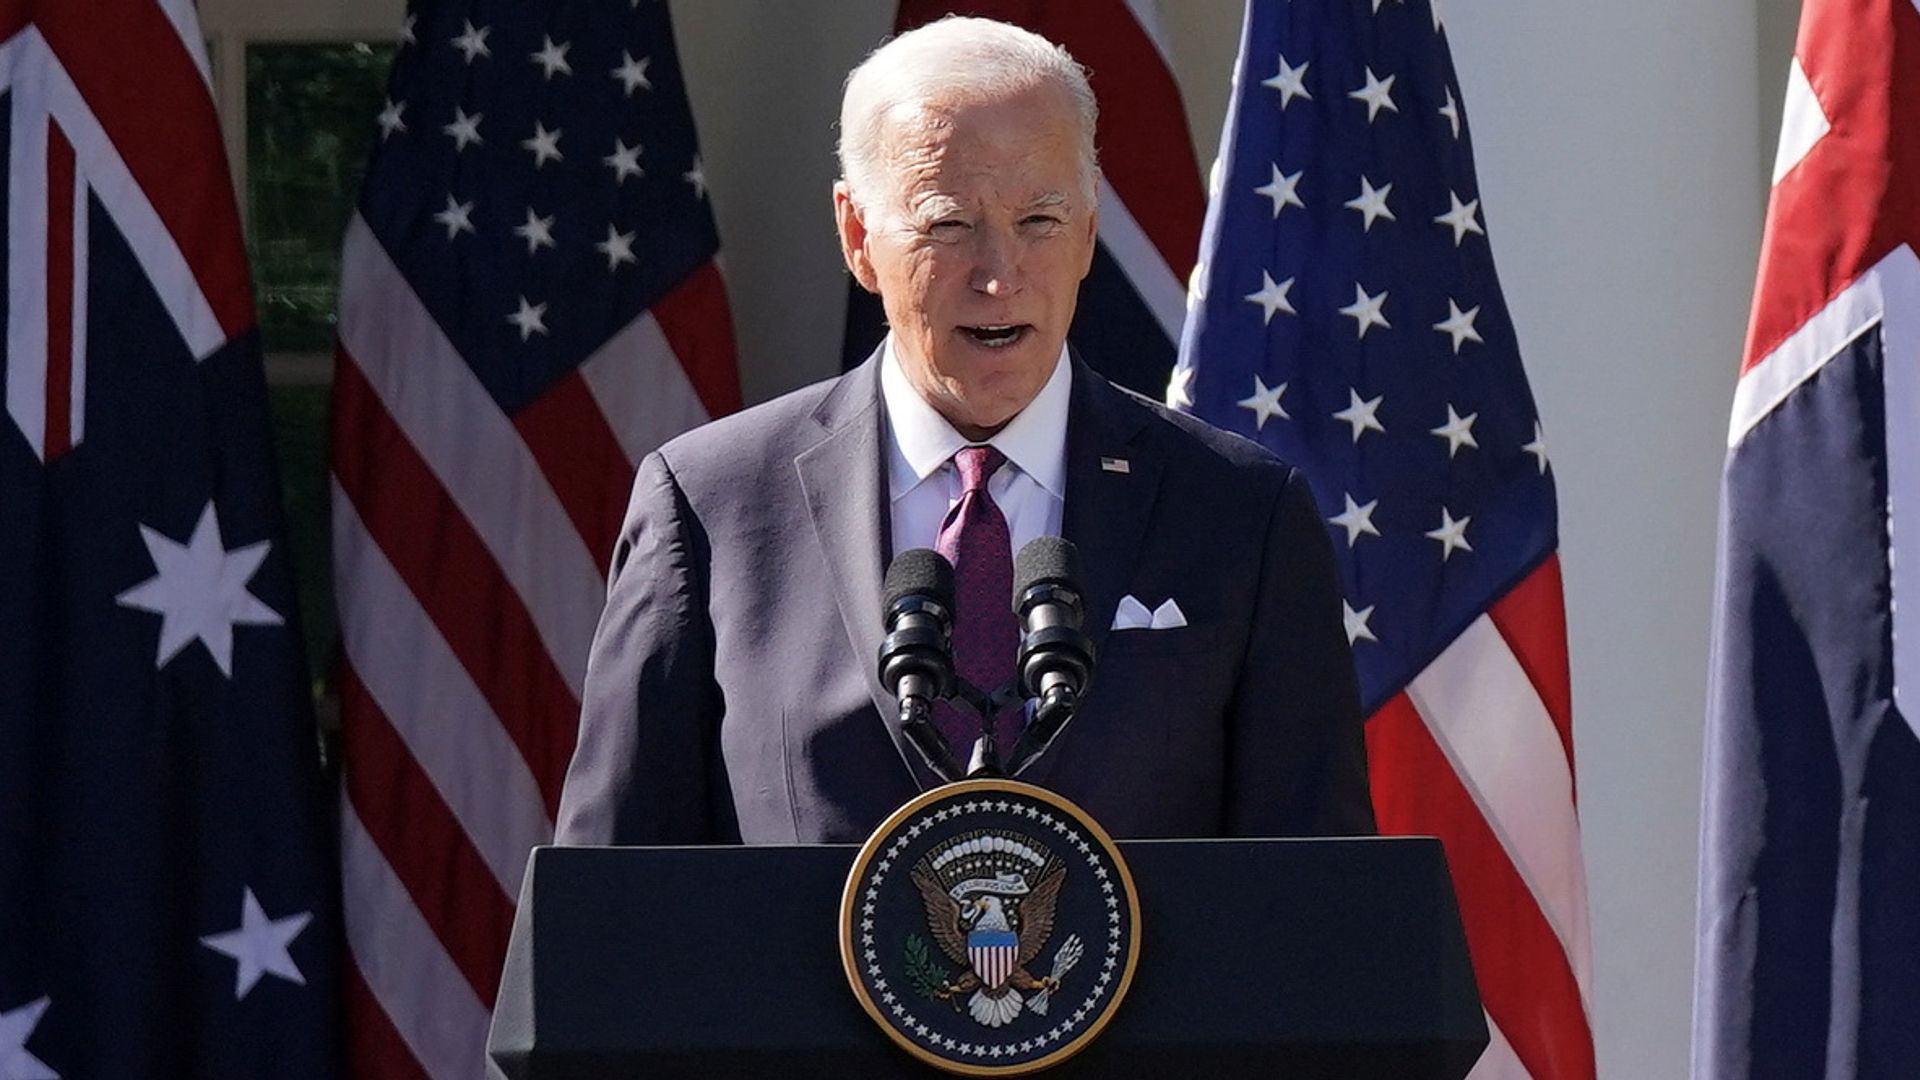 President Biden is losing support among Black Americans. Democrats are struggling to respond. Is identity politics to blame?